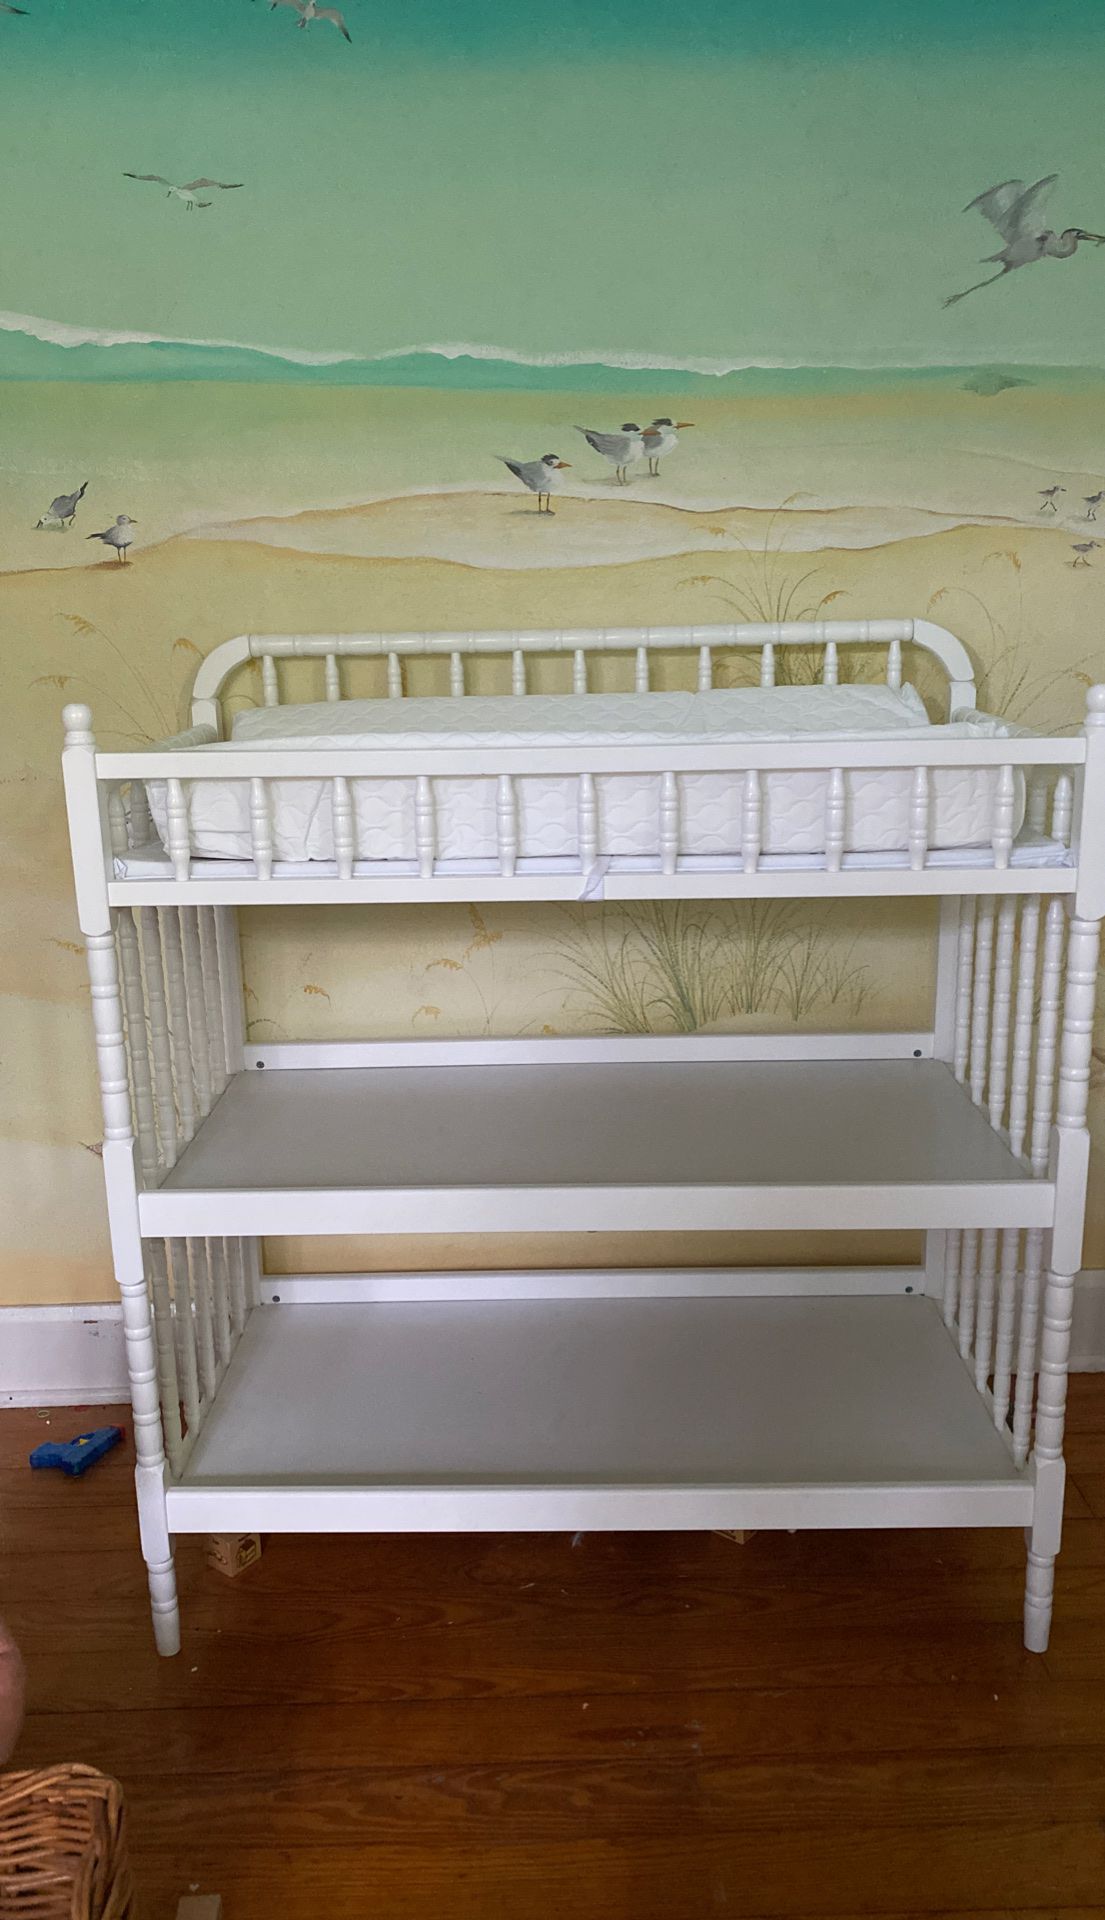 Changing changing table plus pad